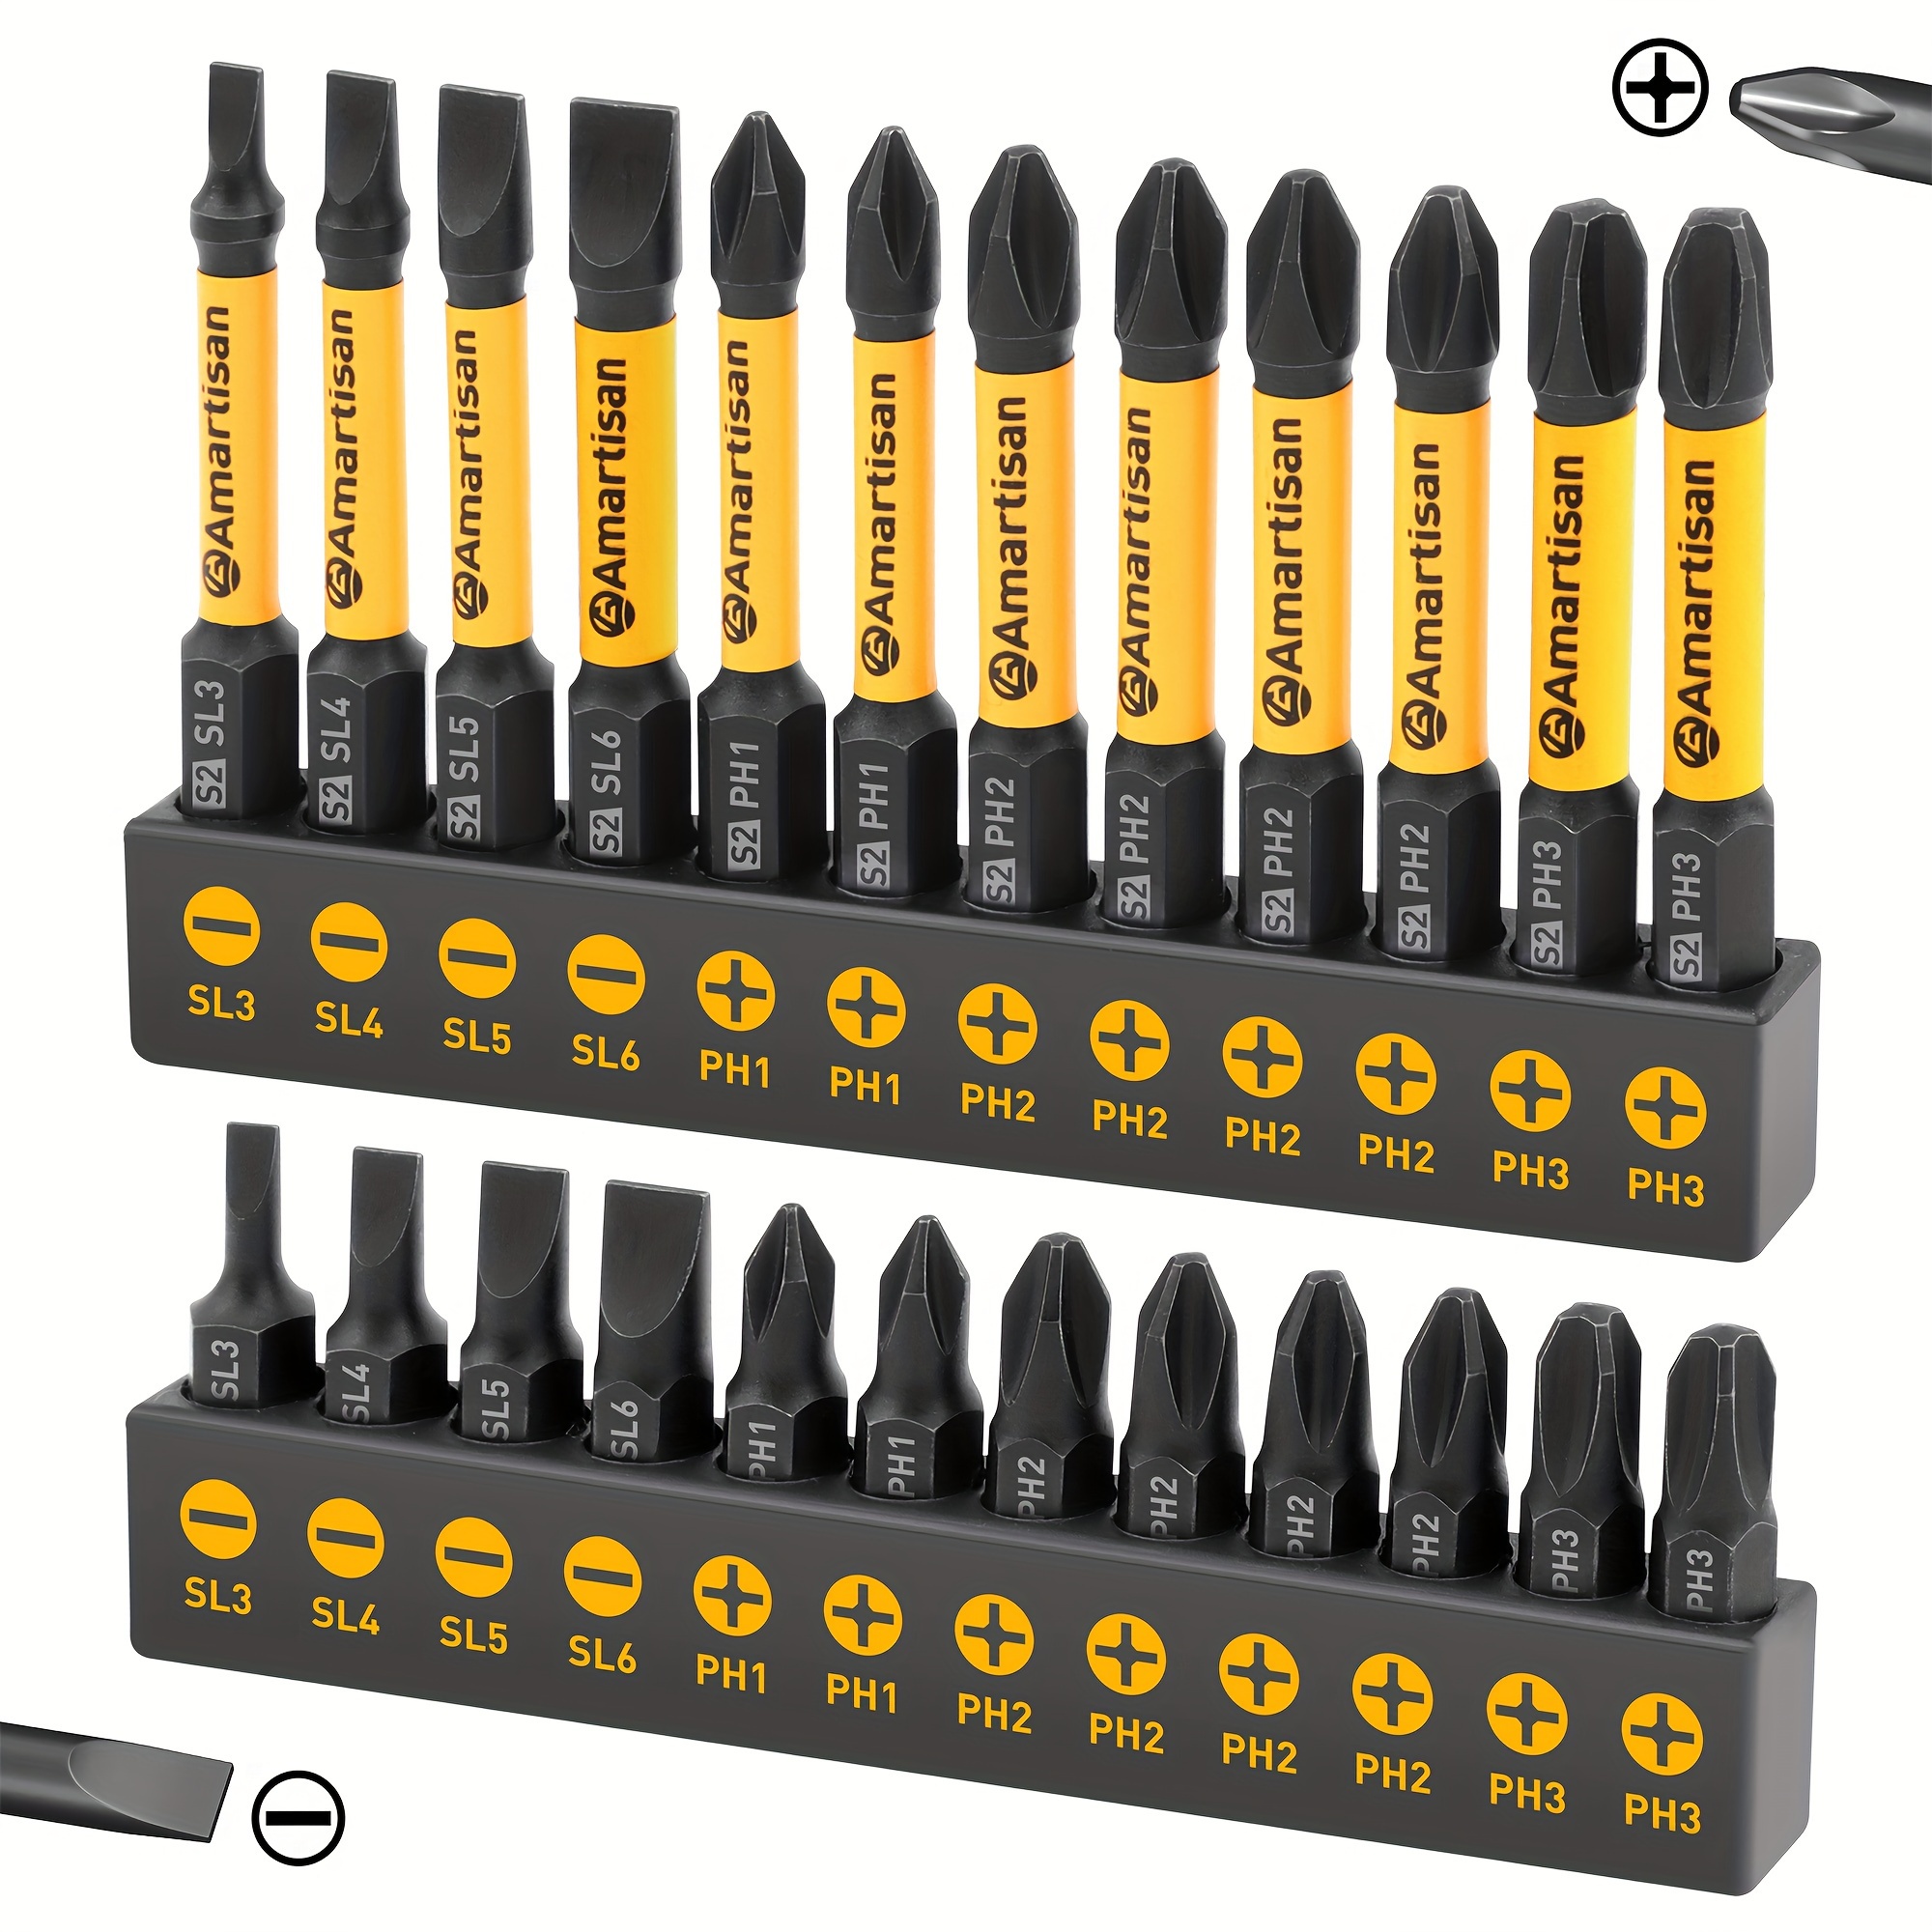 

24pcs Screwdriver Drill Bit S2 Alloy Tool Steel, Slotted And Cross Screwdriver Set, Drill Bit Length 1 "and 2.3